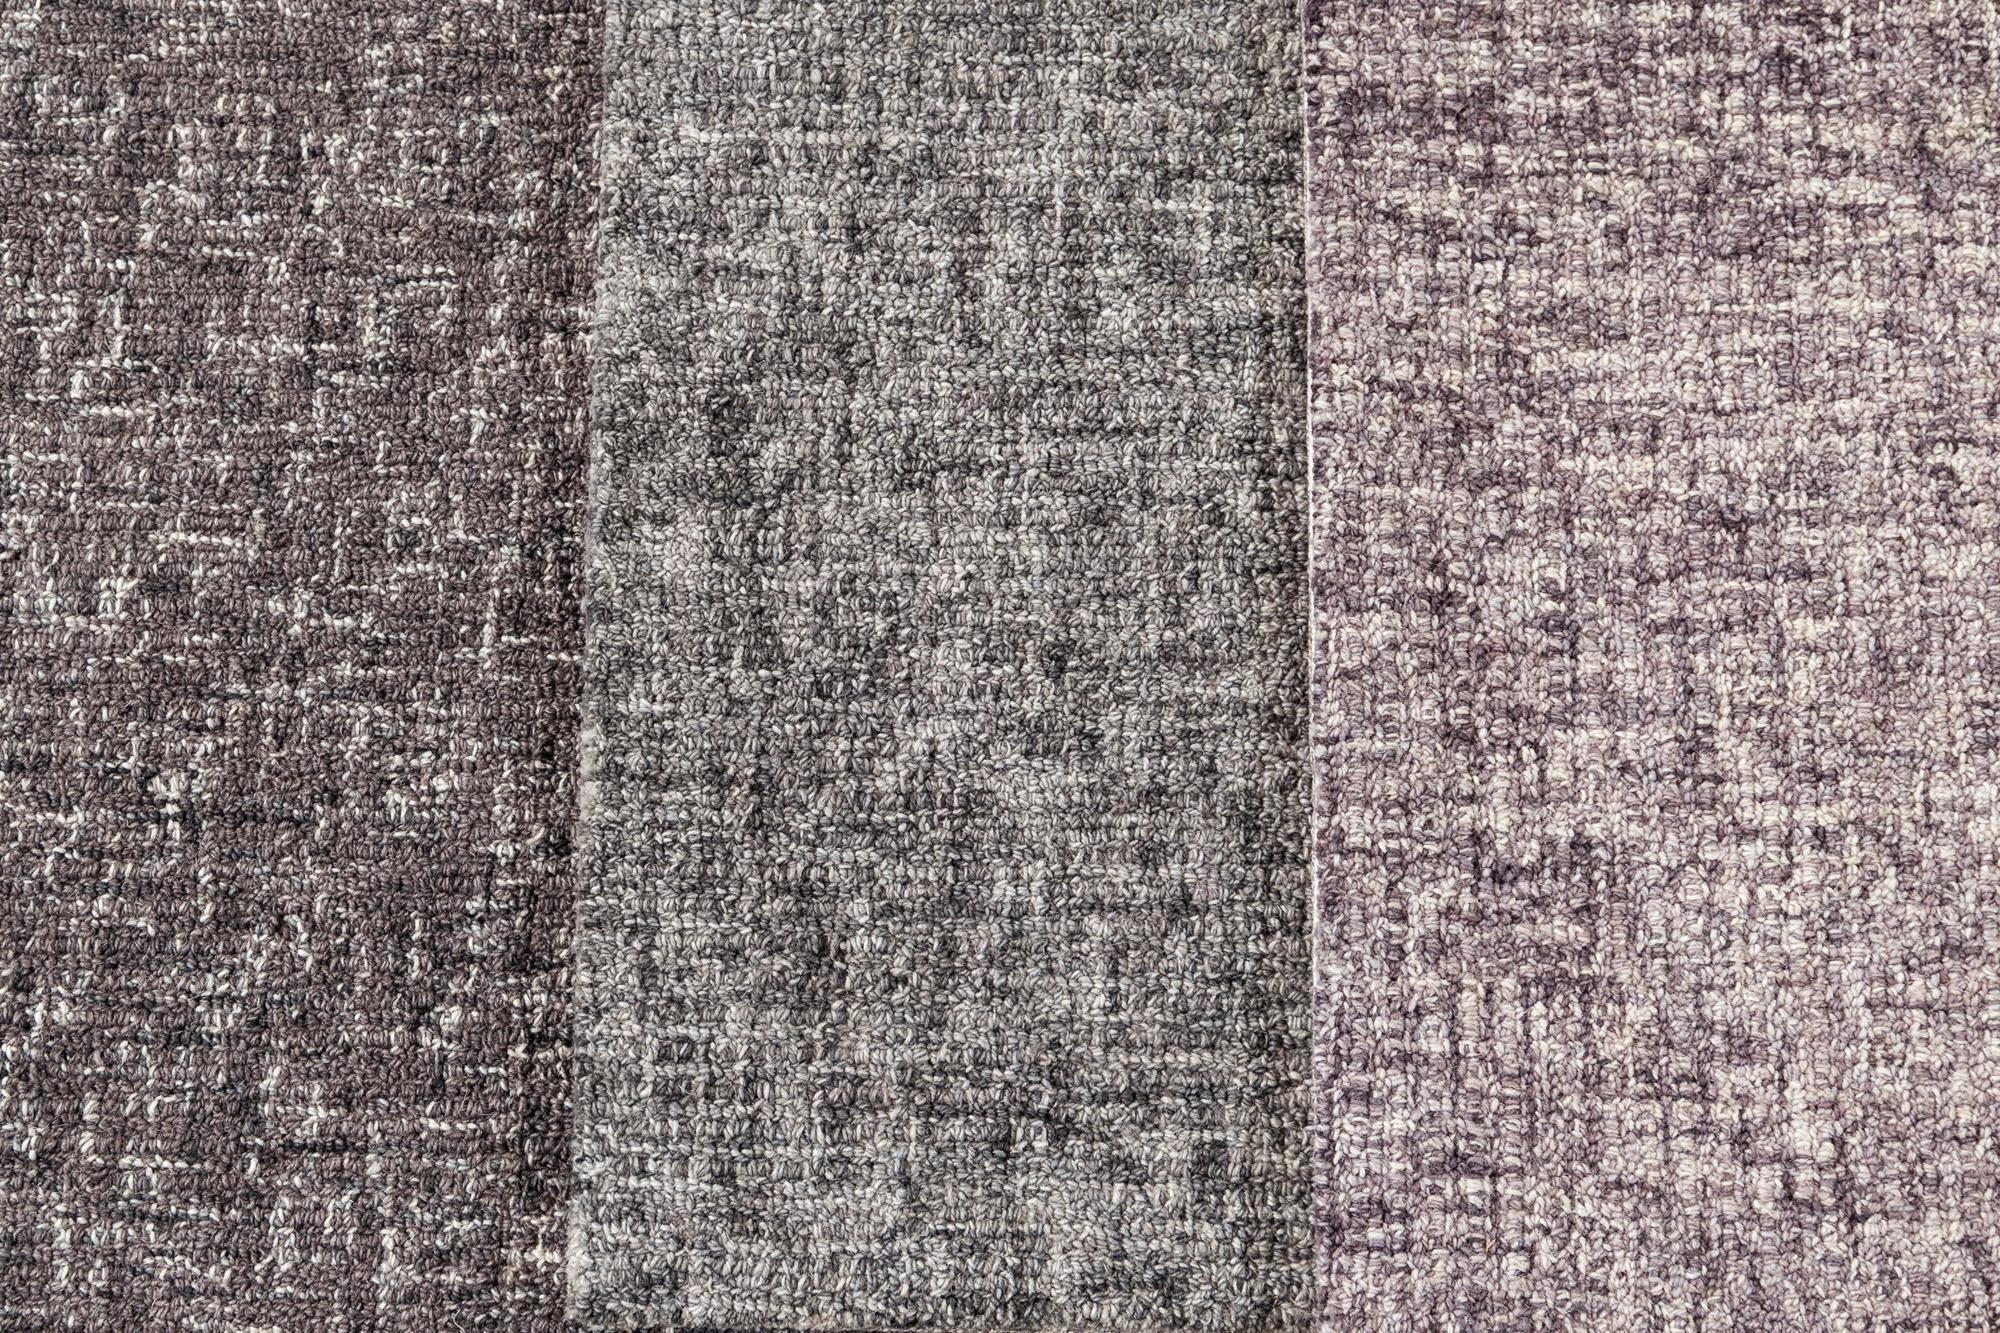 Tufted wool custom rug. Custom sizes and colors made-to-order.

 Collection: Easton
Material: Wool
Lead time: Approximate 15-20 weeks available
Colors: 20+ shades and styles
Made in India.
Price listed is for an 8' x 10' rug.